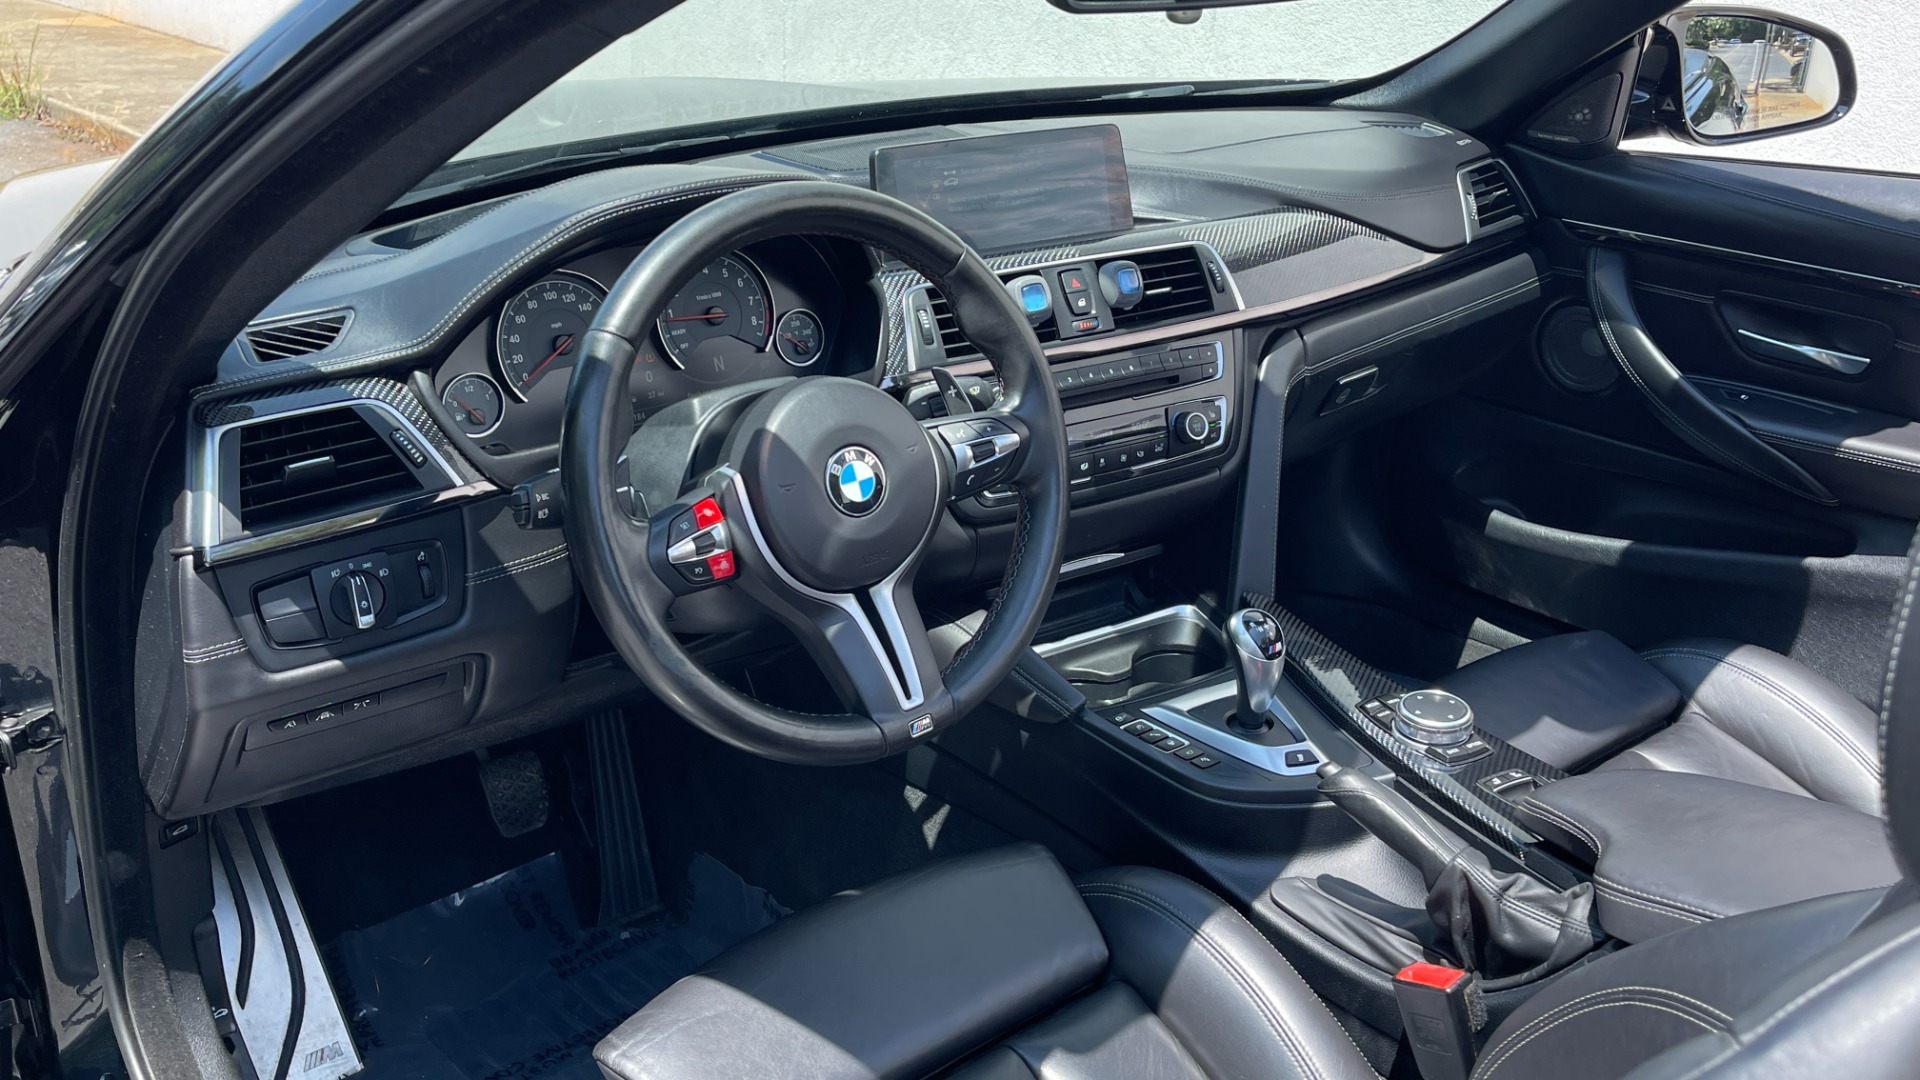 Used 2016 BMW M4 CONVERTIBLE / EXECUTIVE / DUAL CLUTCH / ADAPTIVE M SUSPENSION for sale $44,000 at Formula Imports in Charlotte NC 28227 11